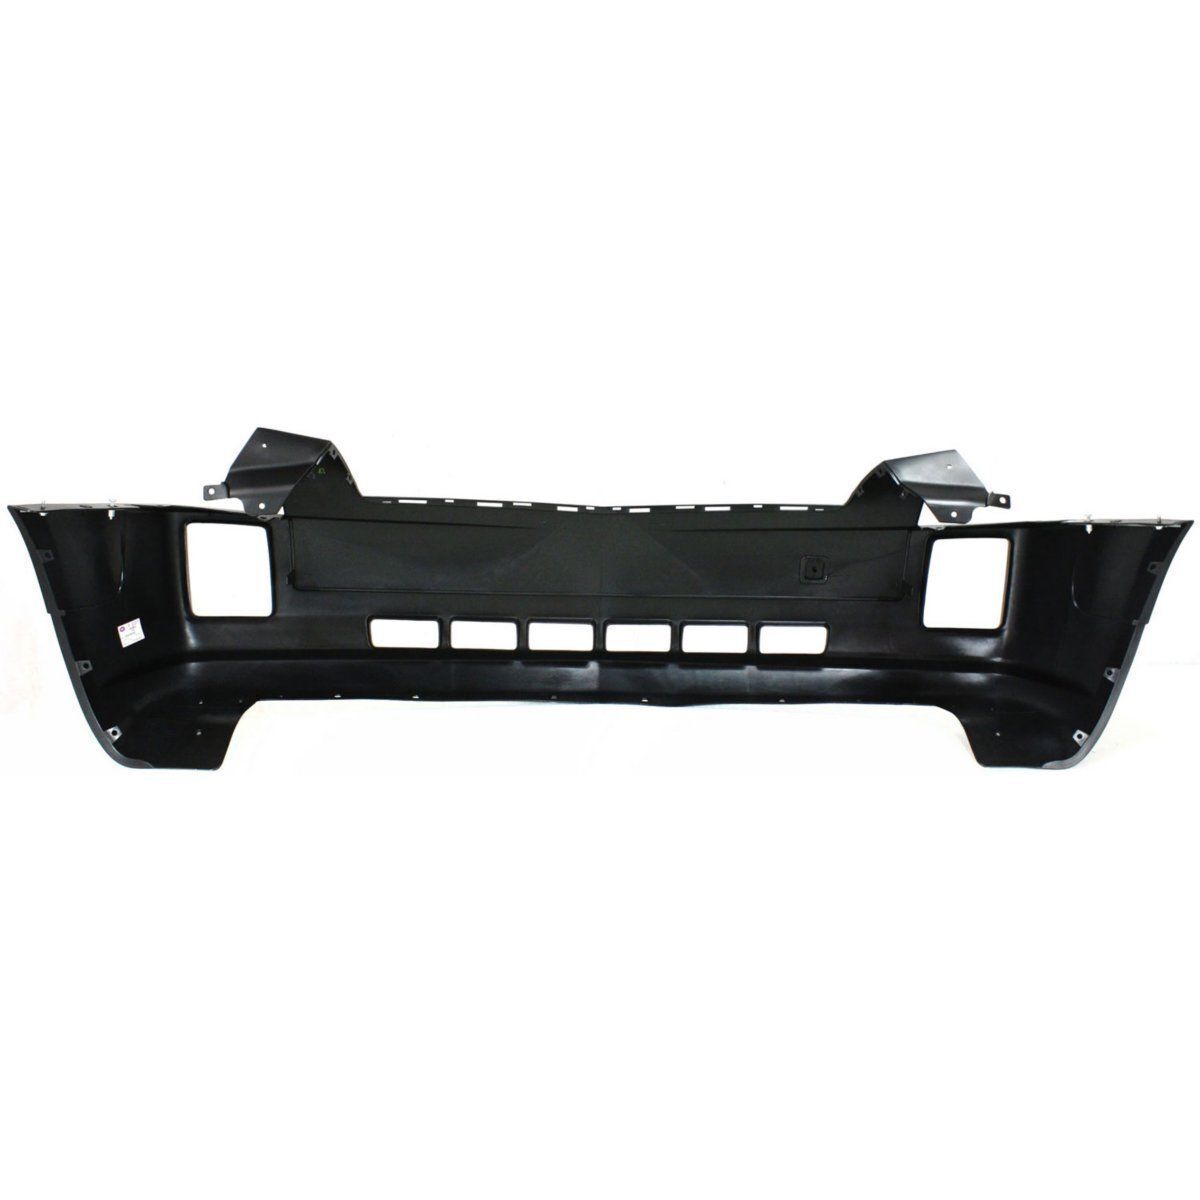 2004-2009 CADILLAC SRX; Front Bumper Cover; Upper w/o HL Washer w/o Sport Painted to Match